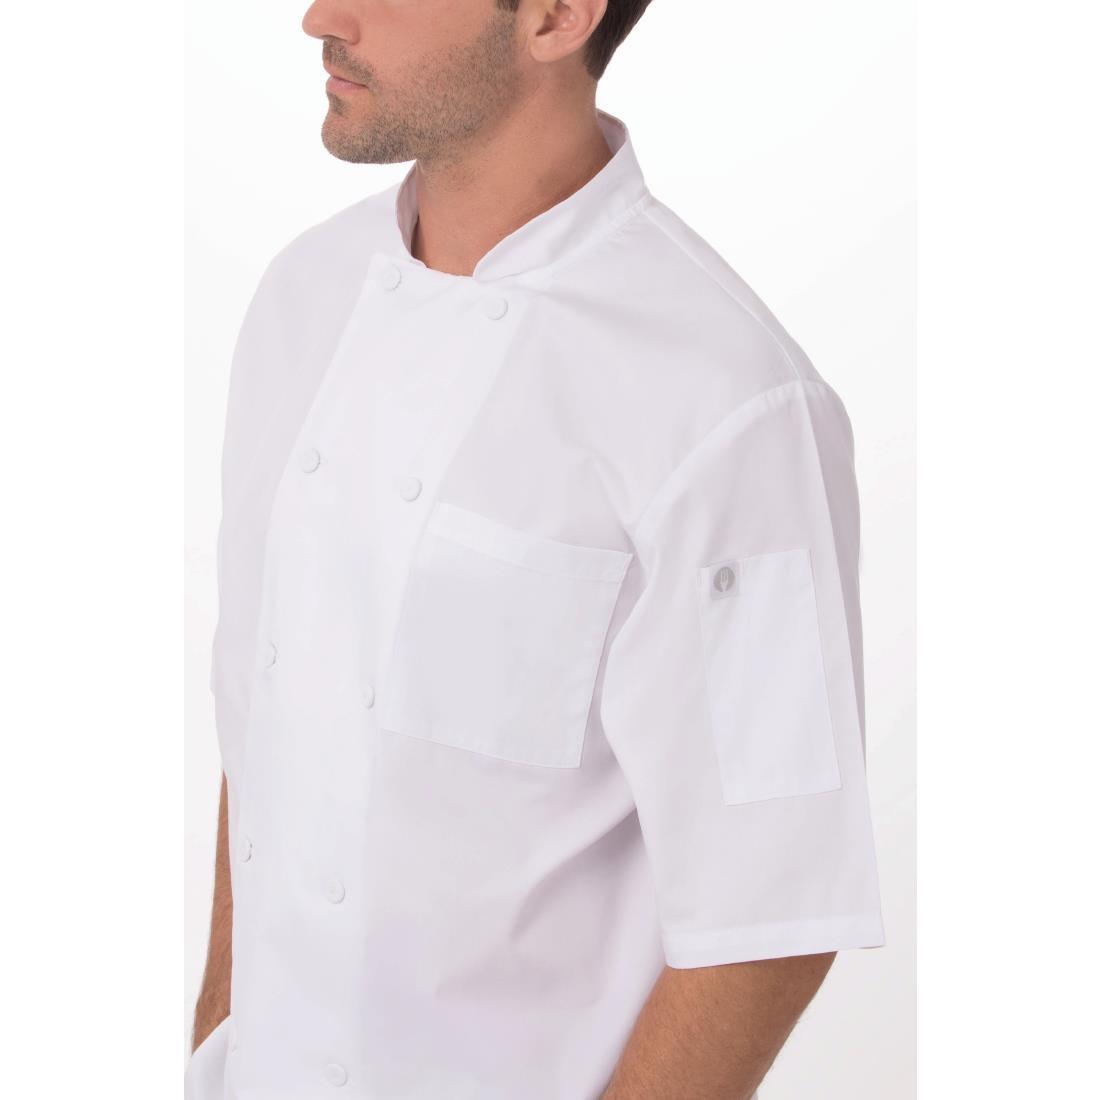 Chefs Works Montreal Cool Vent Unisex Short Sleeve Chefs Jacket White L - A914-L  - 6